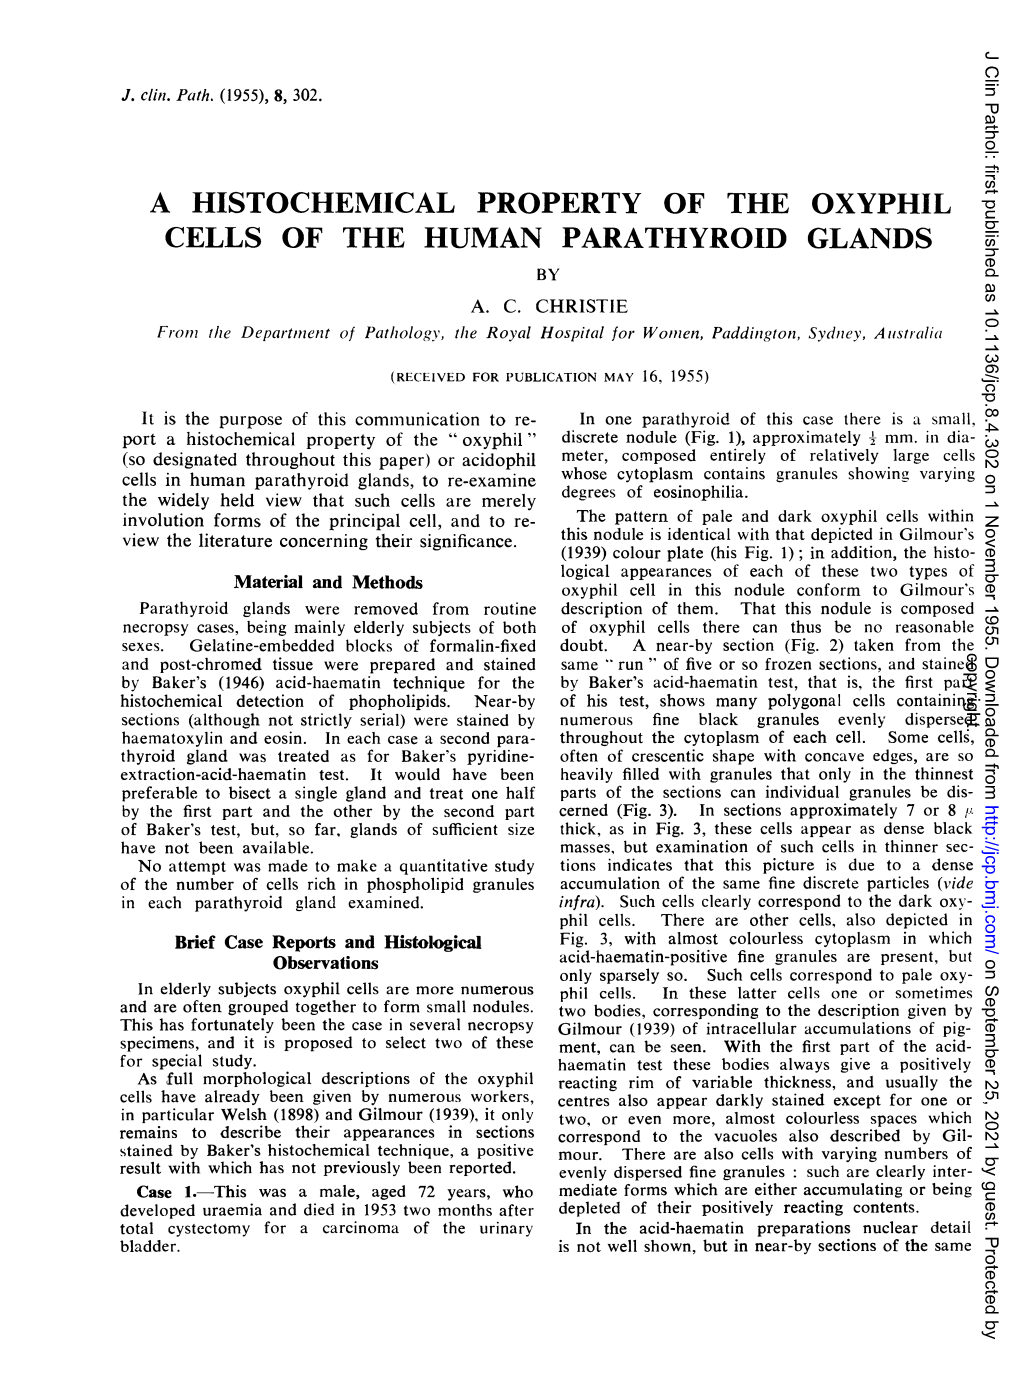 A Histochemical Property of the Oxyphil Cells of the Human Parathyroid Glands by A